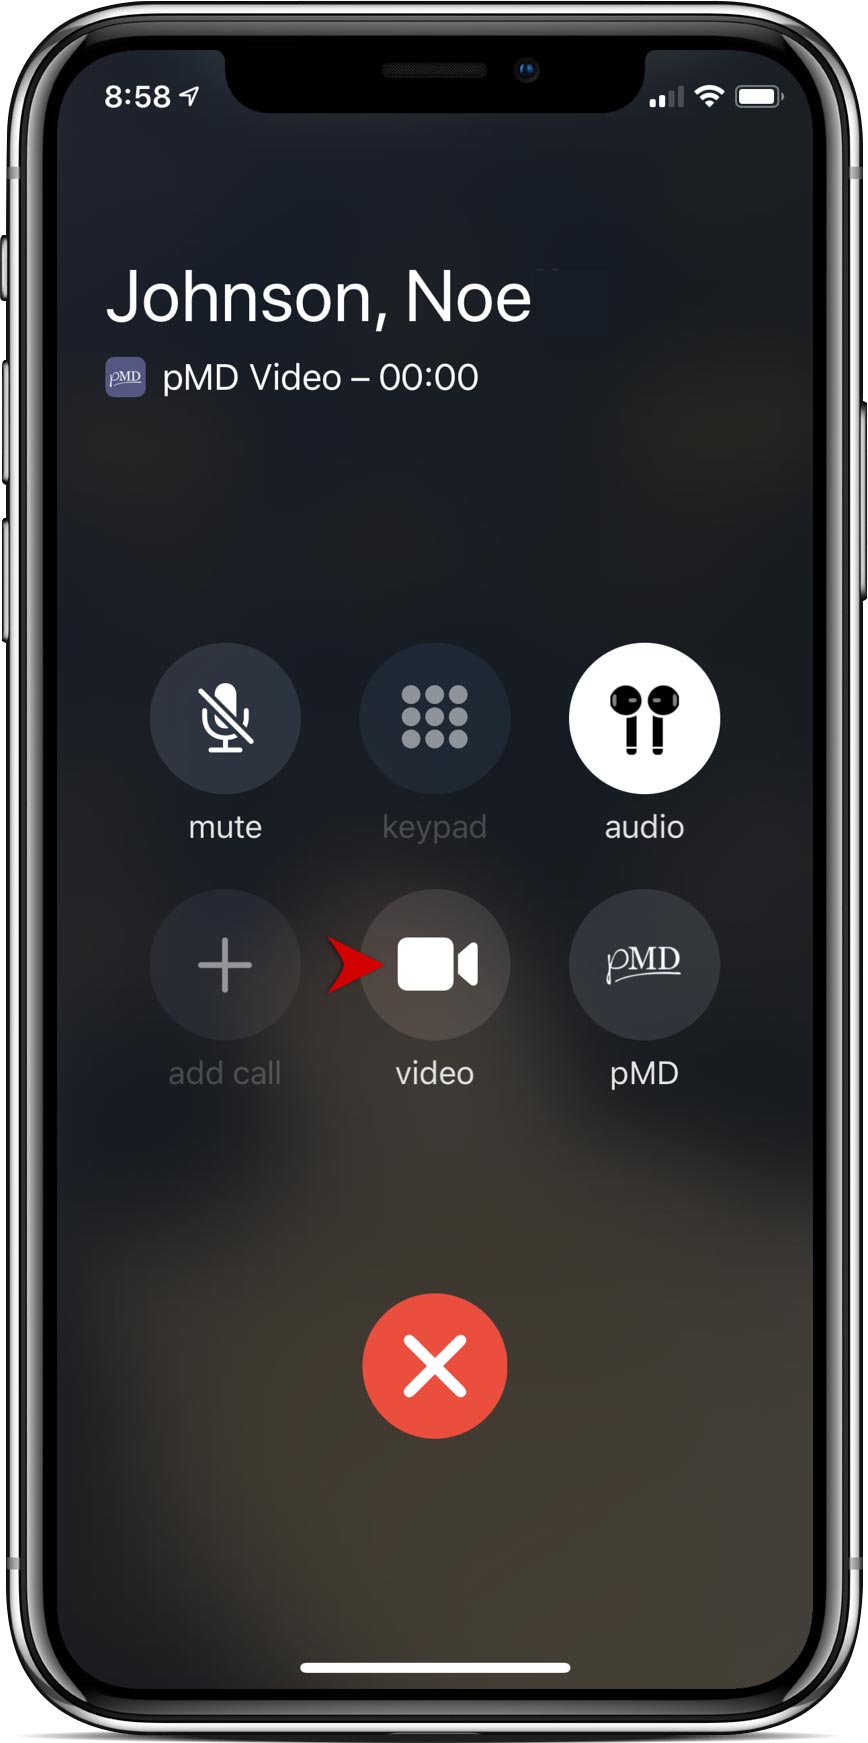 Image of phone screen while on a call, with video button highlighted